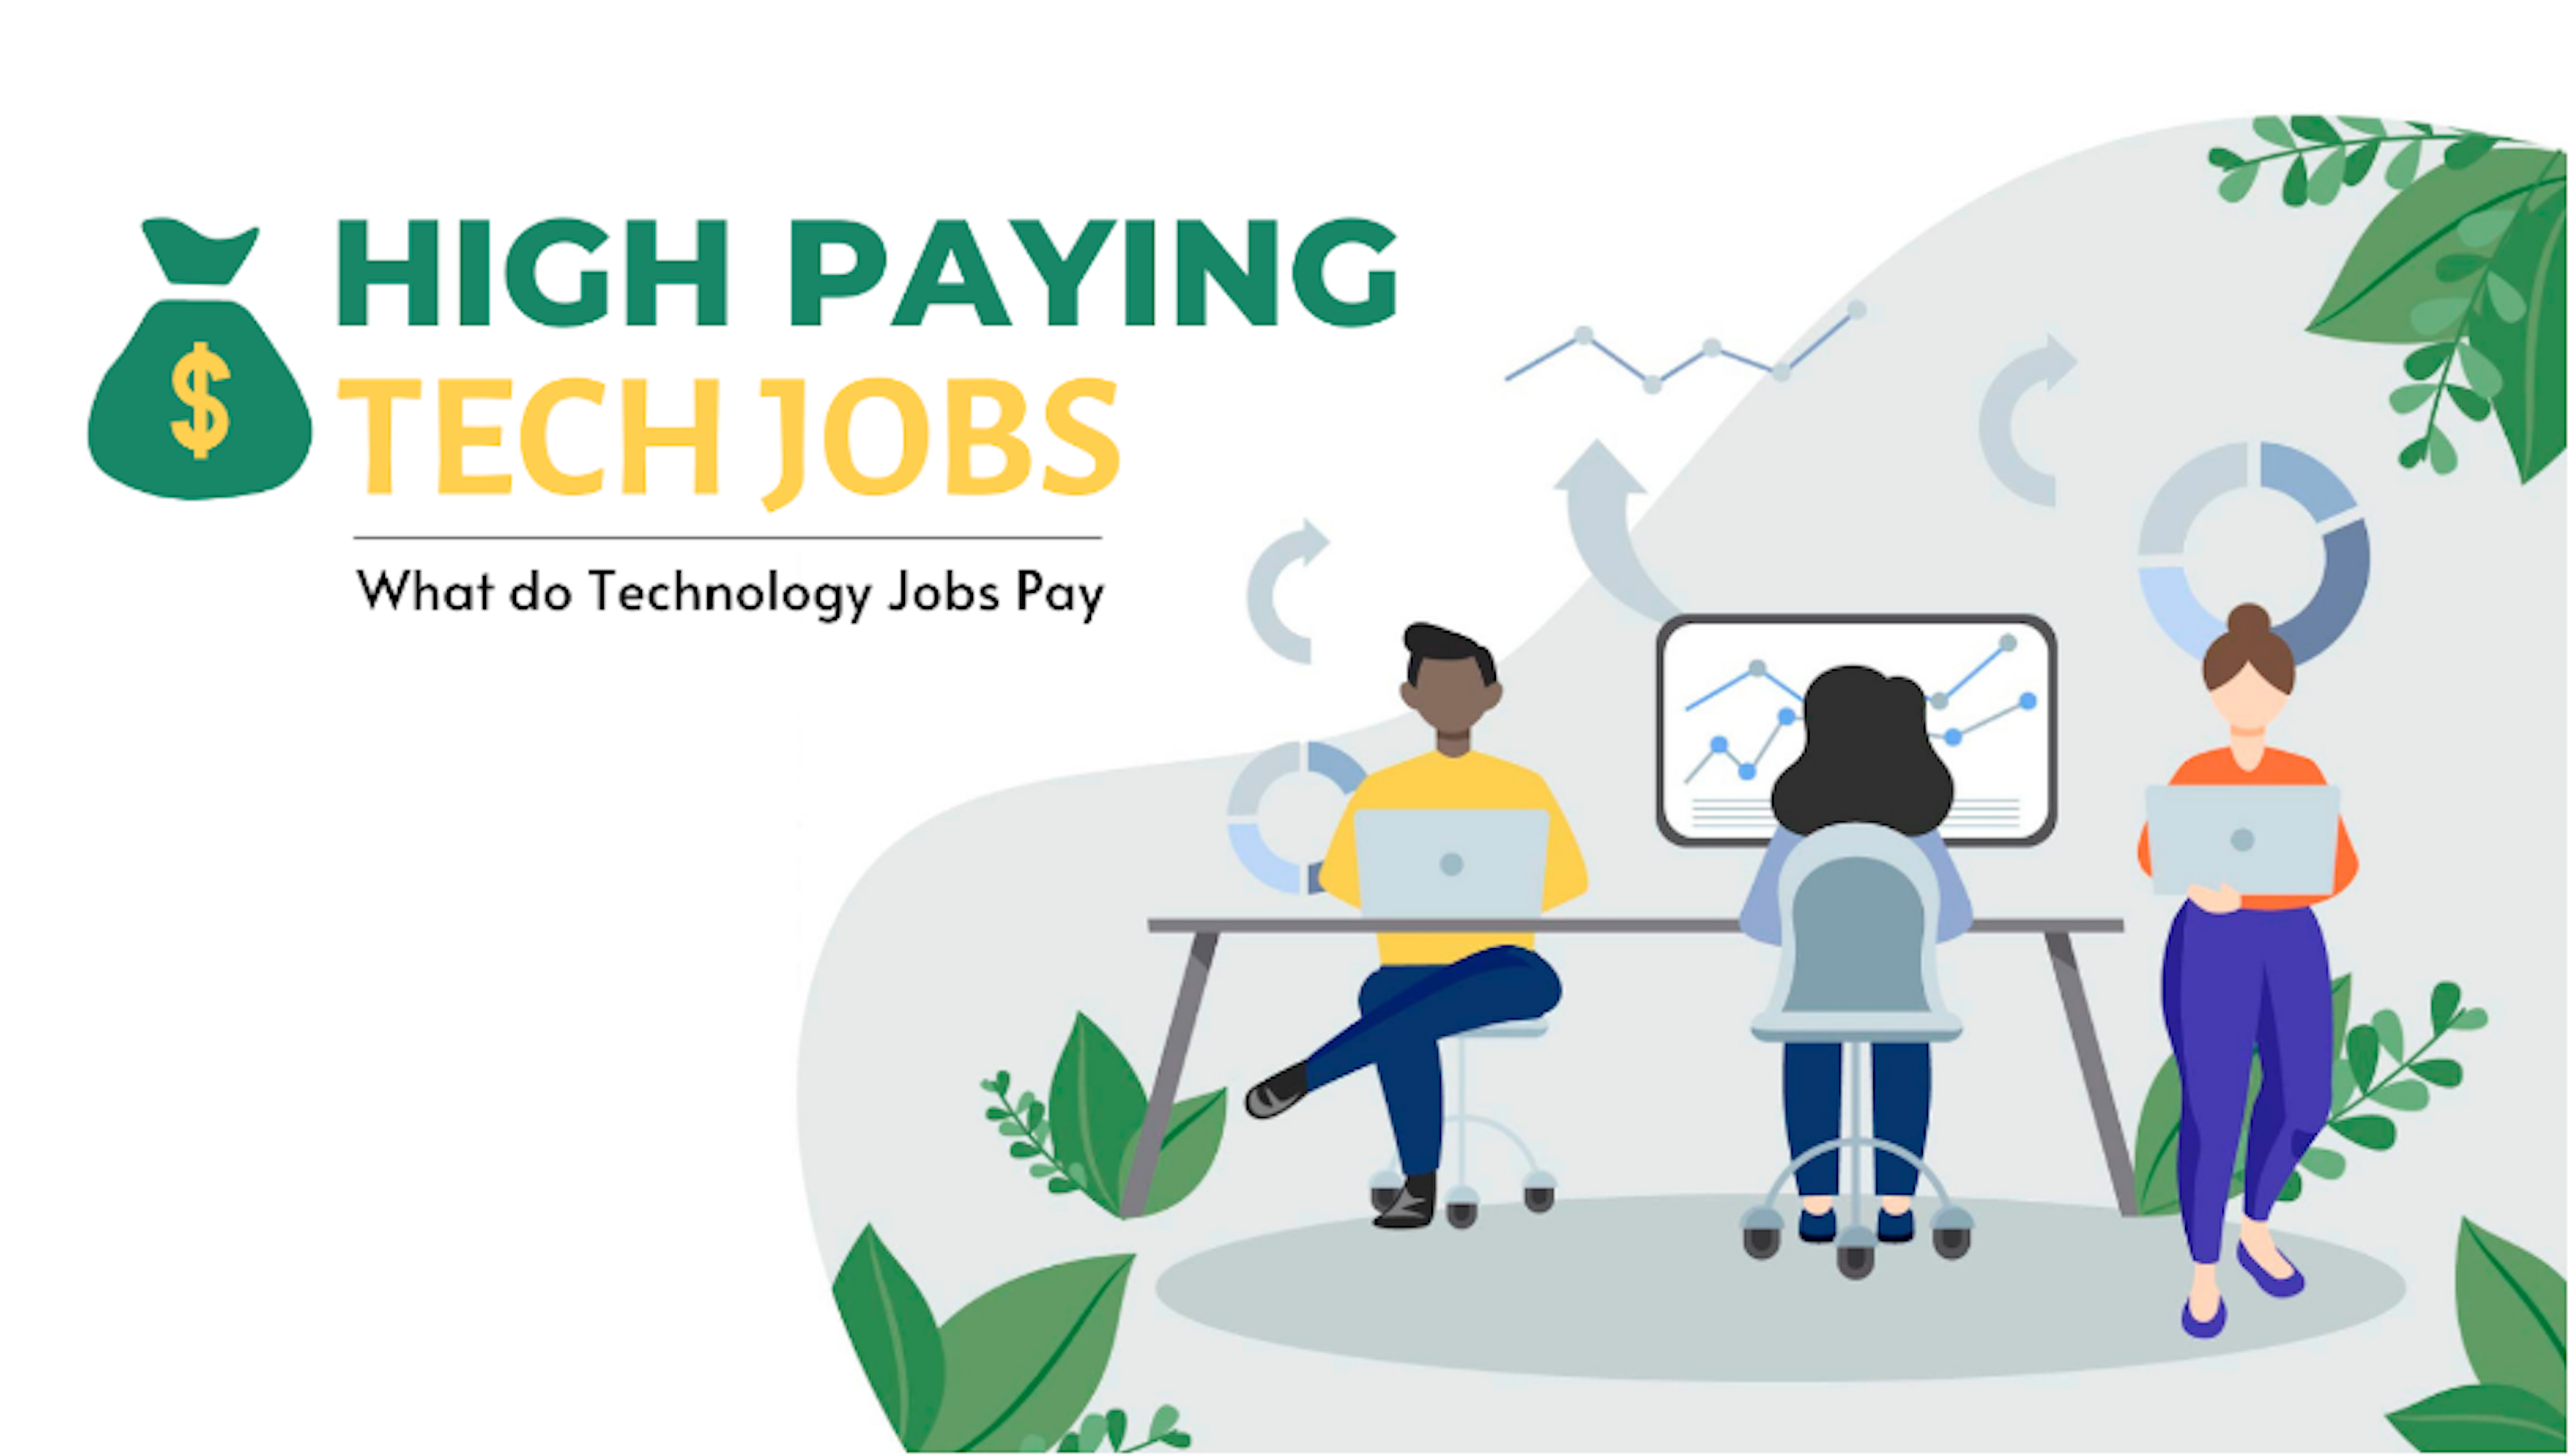 High Paying Tech Jobs | What do Technology Jobs Pay